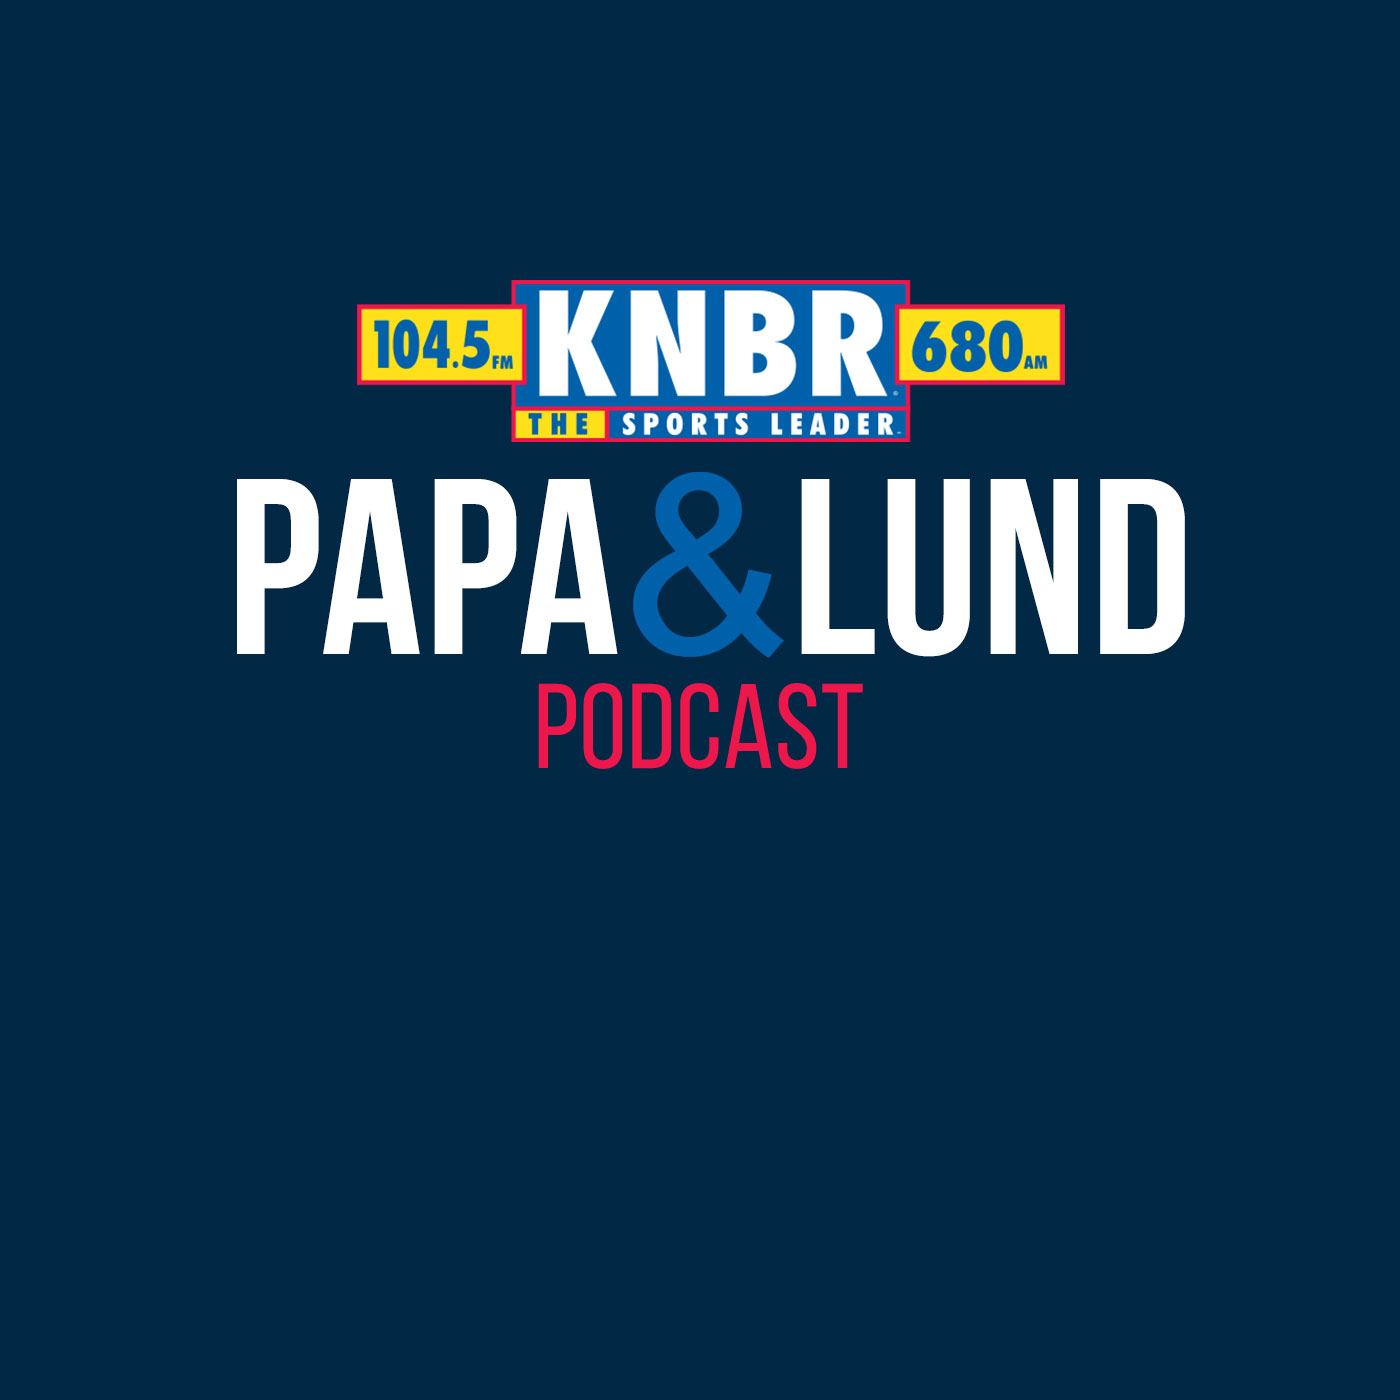 7-29 Andrew Baggarly joins Papa & Lund to discuss the amazing outing from Wood as well as the latest on Juan Soto to the Giants and what Ohtani becoming available could mean for the Giants